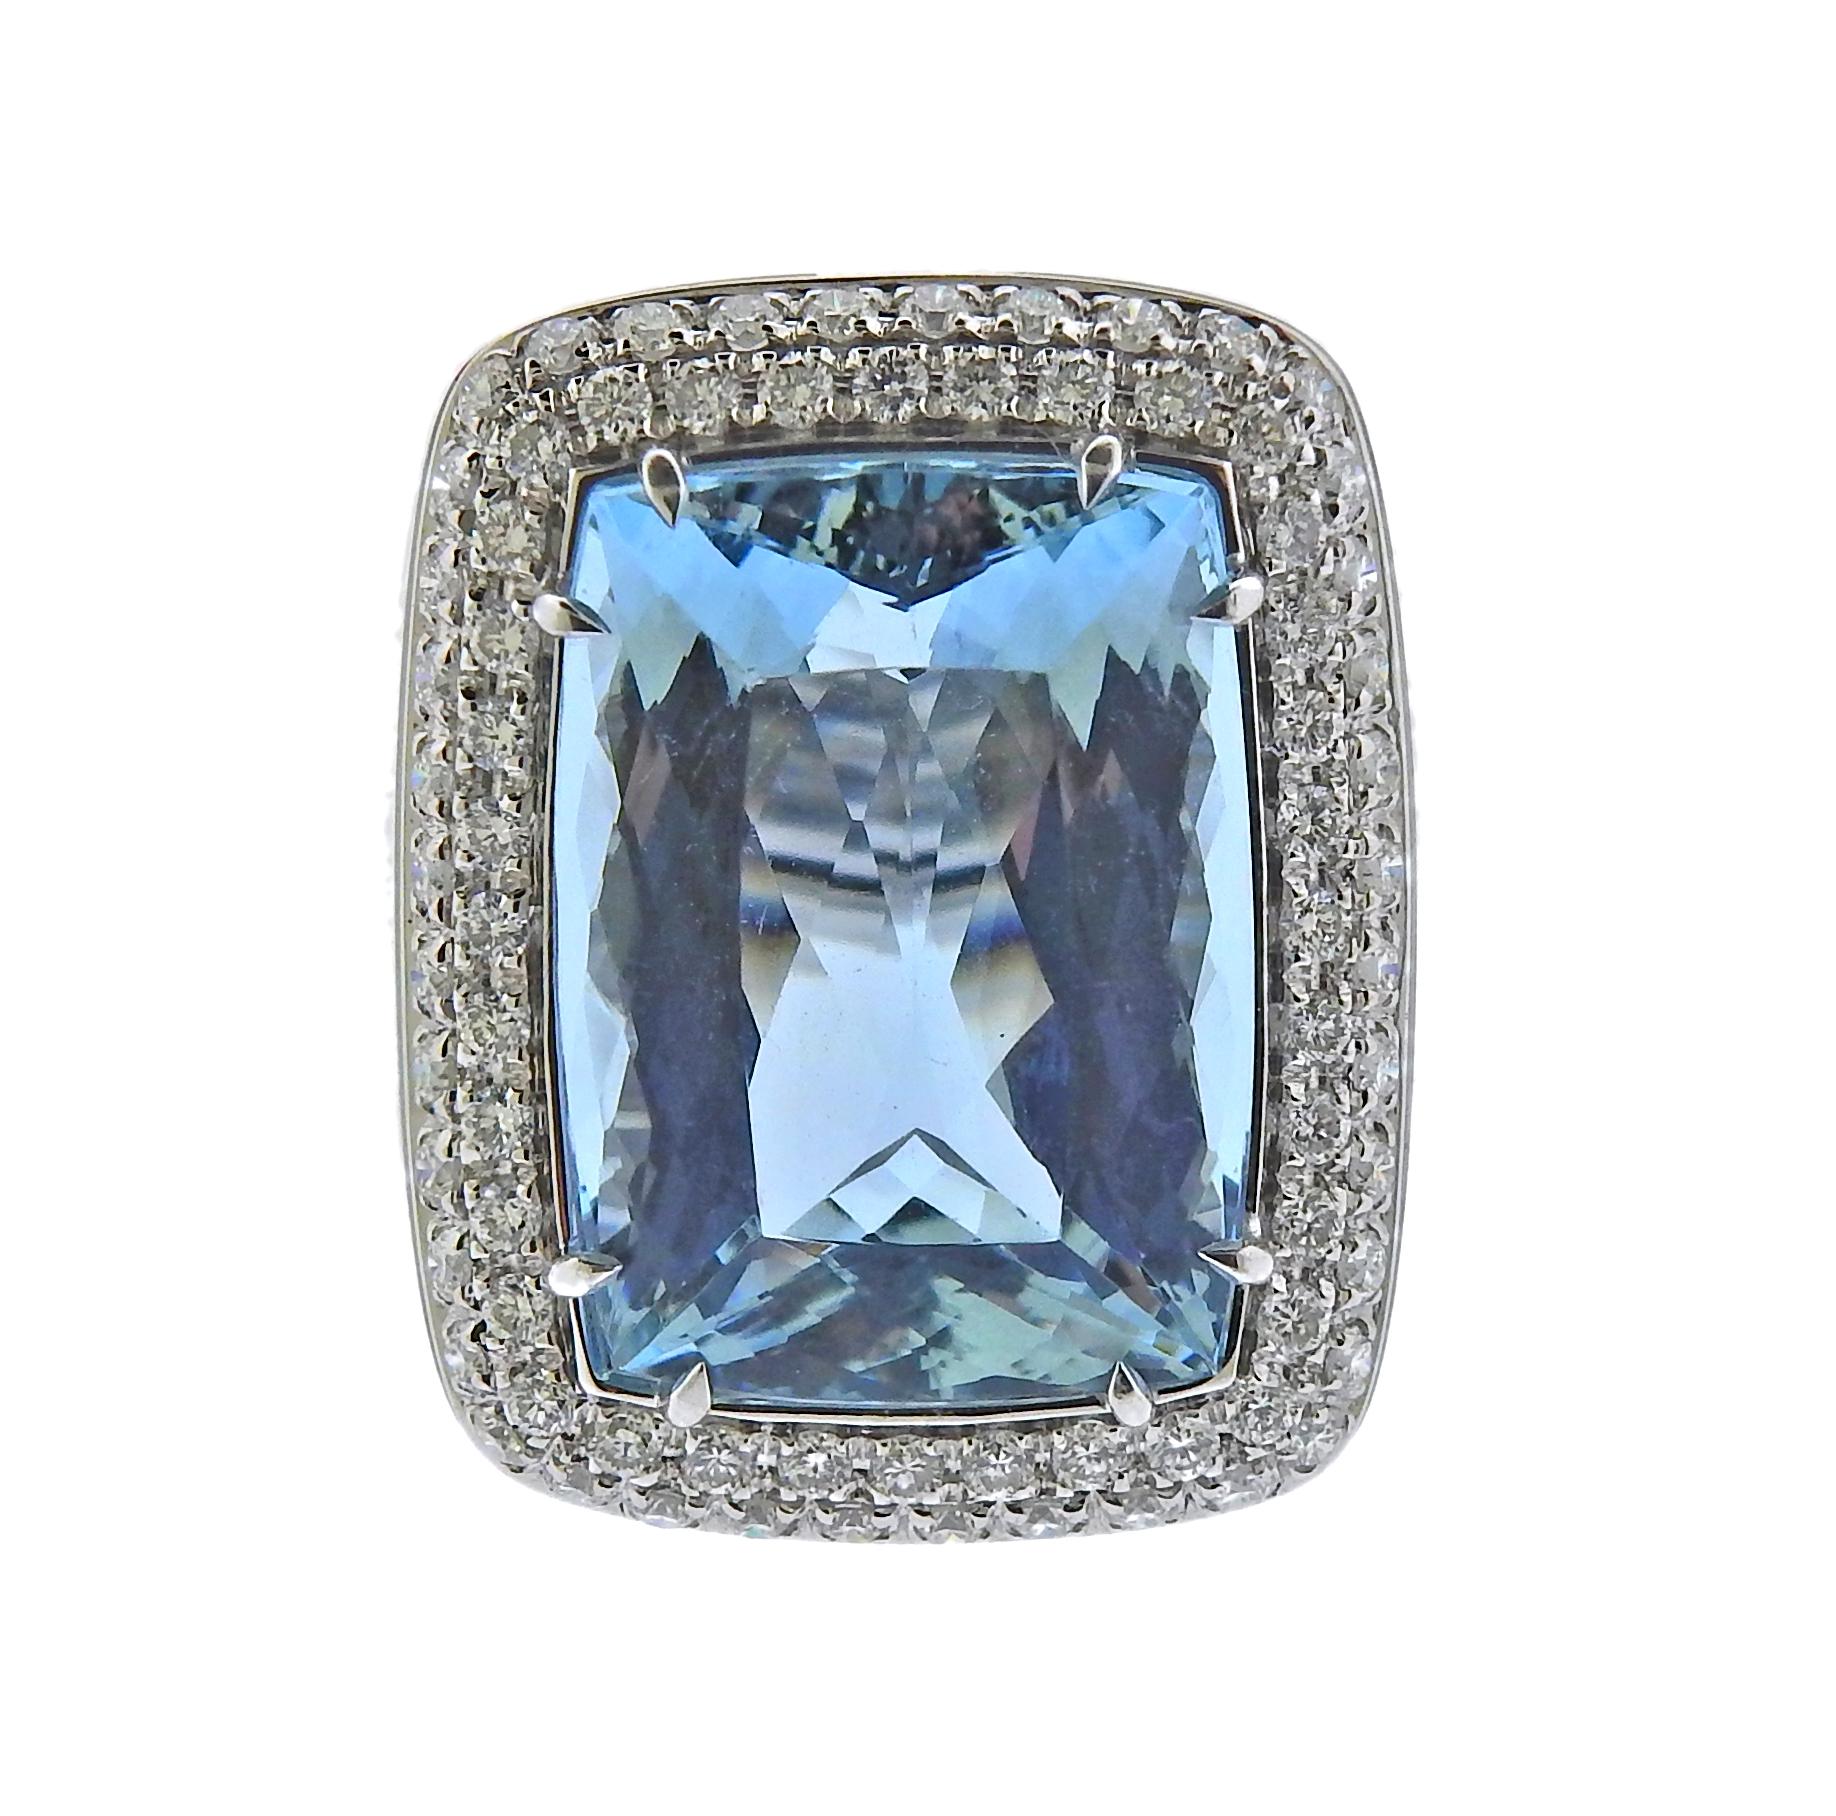 18k white gold cocktail ring, with an EGL Certified 20.47 carat aquamarine, surrounded with crystal and 2.26ctw in GH/VS diamonds. Ring size is 7.5, ring top measures - 28mm x 22mm. Weight of the ring is : 24.8 grams. Marked: 750, Italian mark,